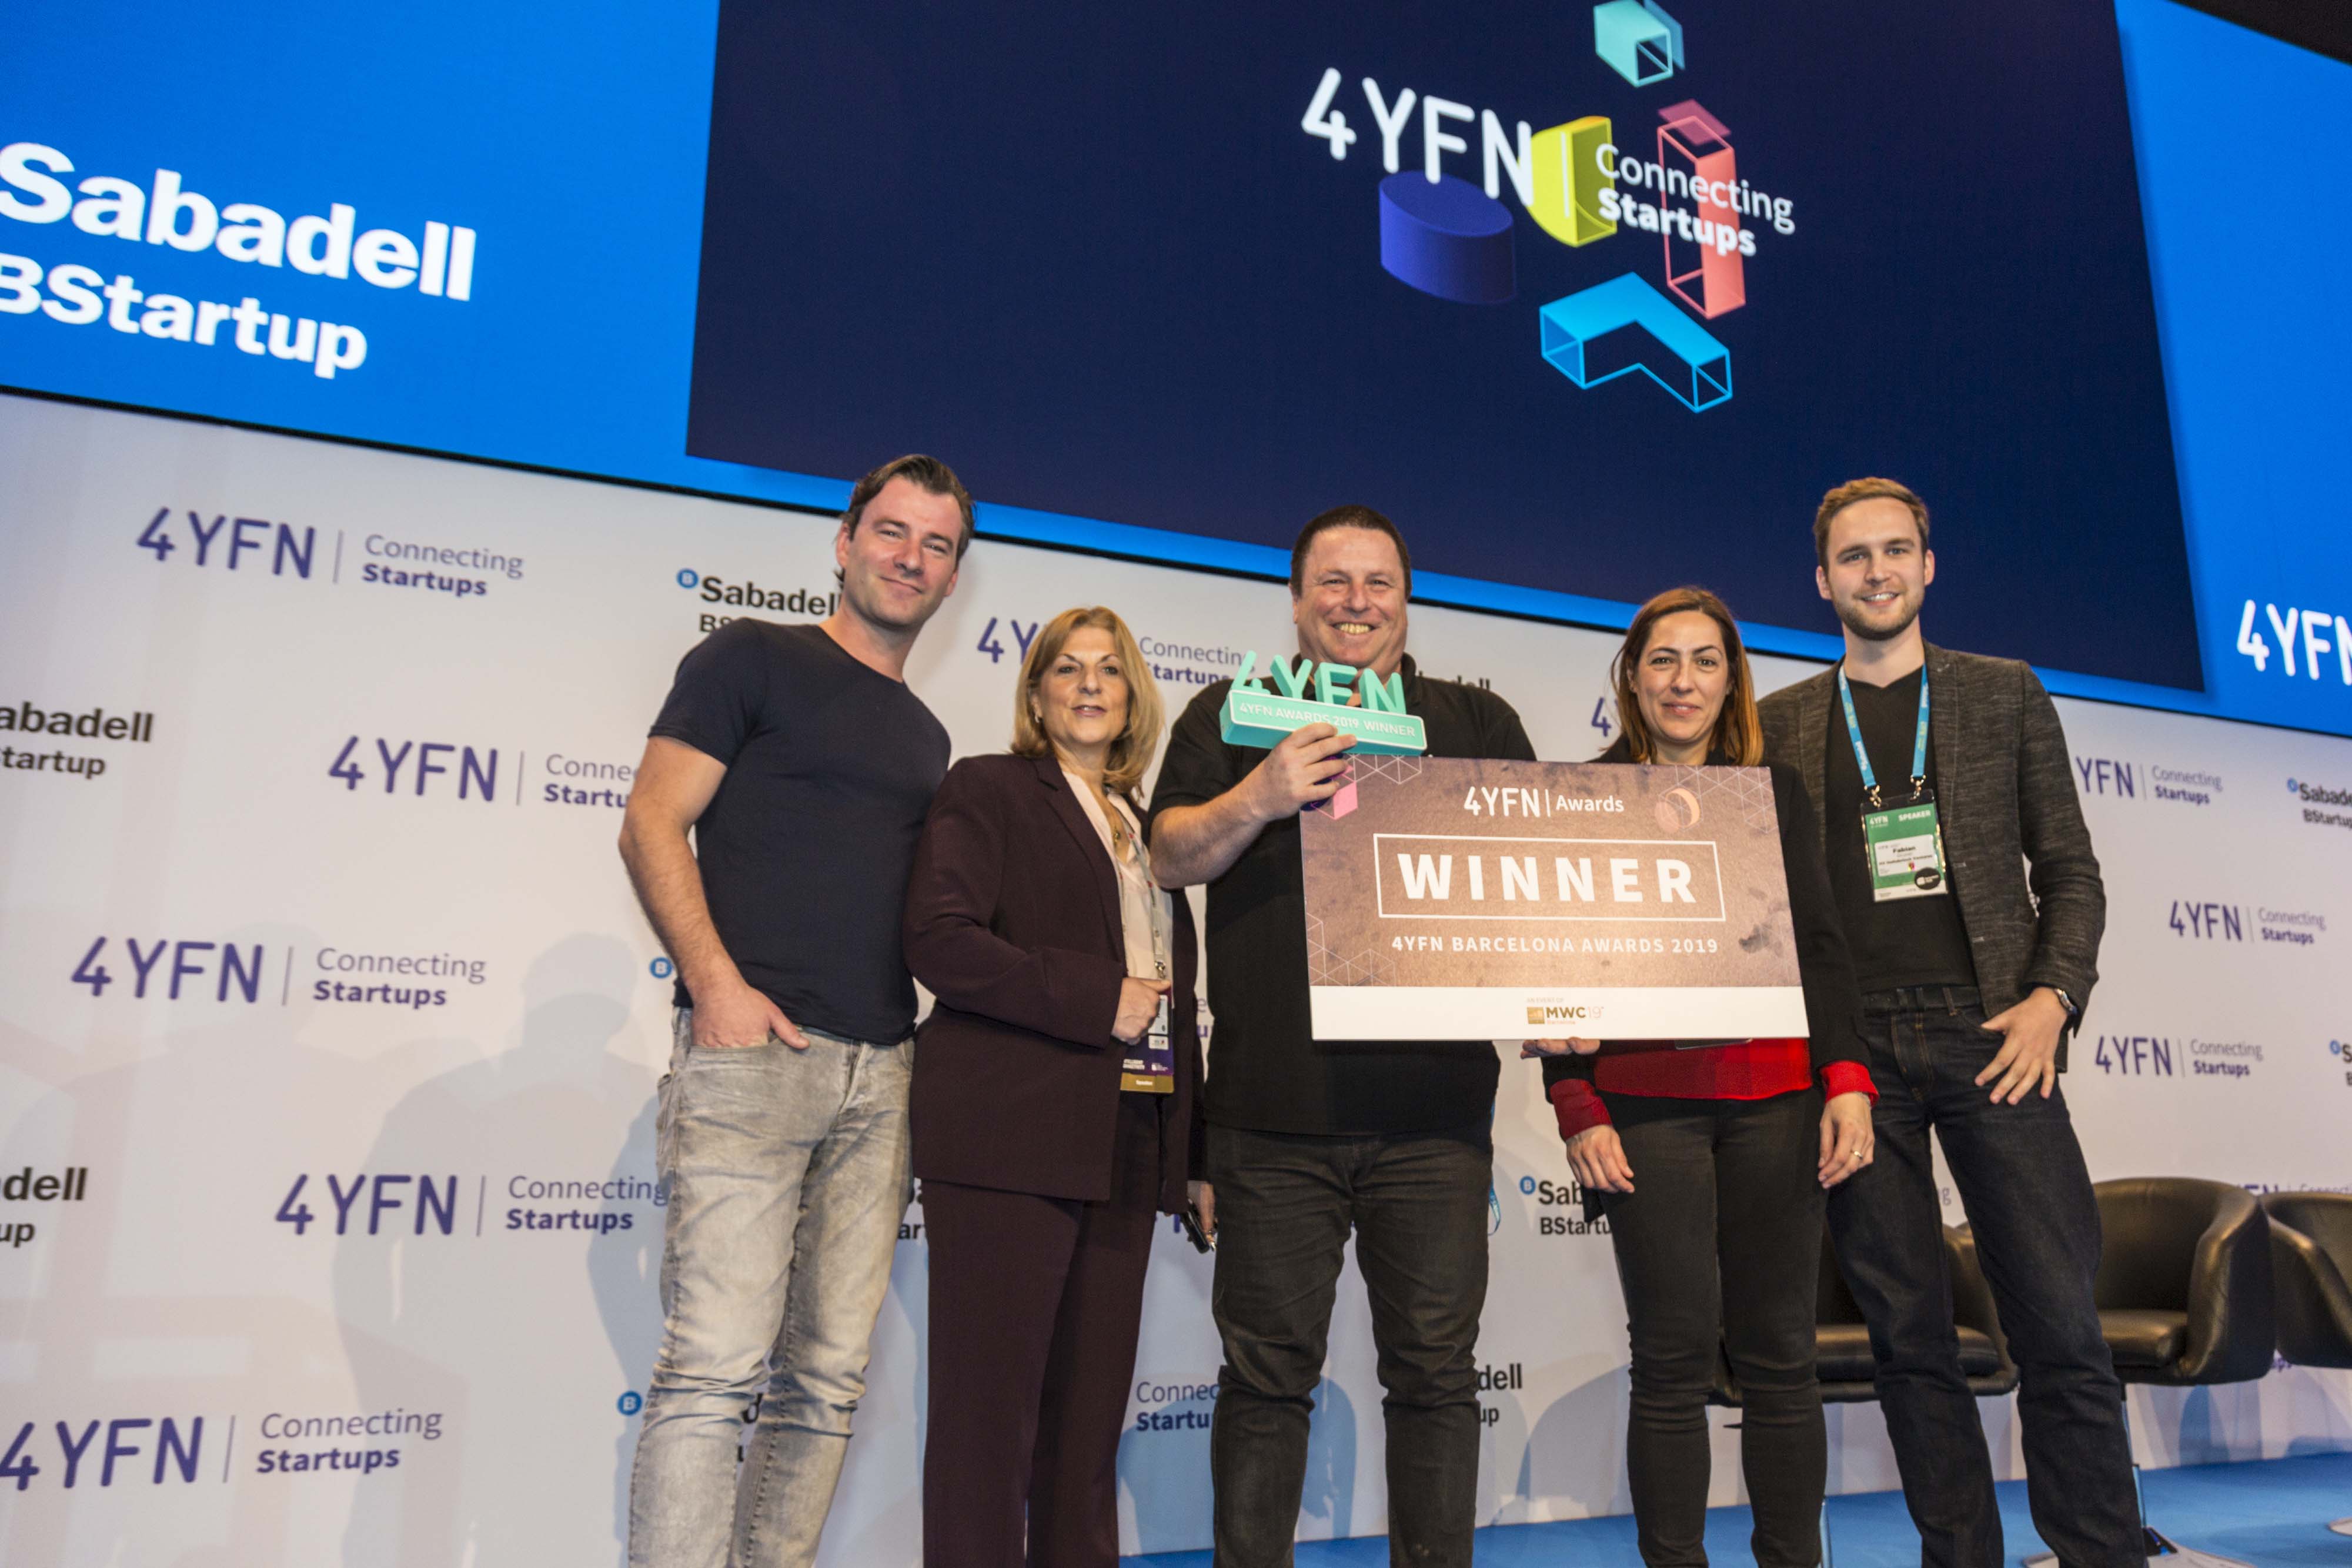 jammertal wellness questionnaire intrusive | IoT Device Security Startup NanoLock Wins GSMA’s 4YFN Competition